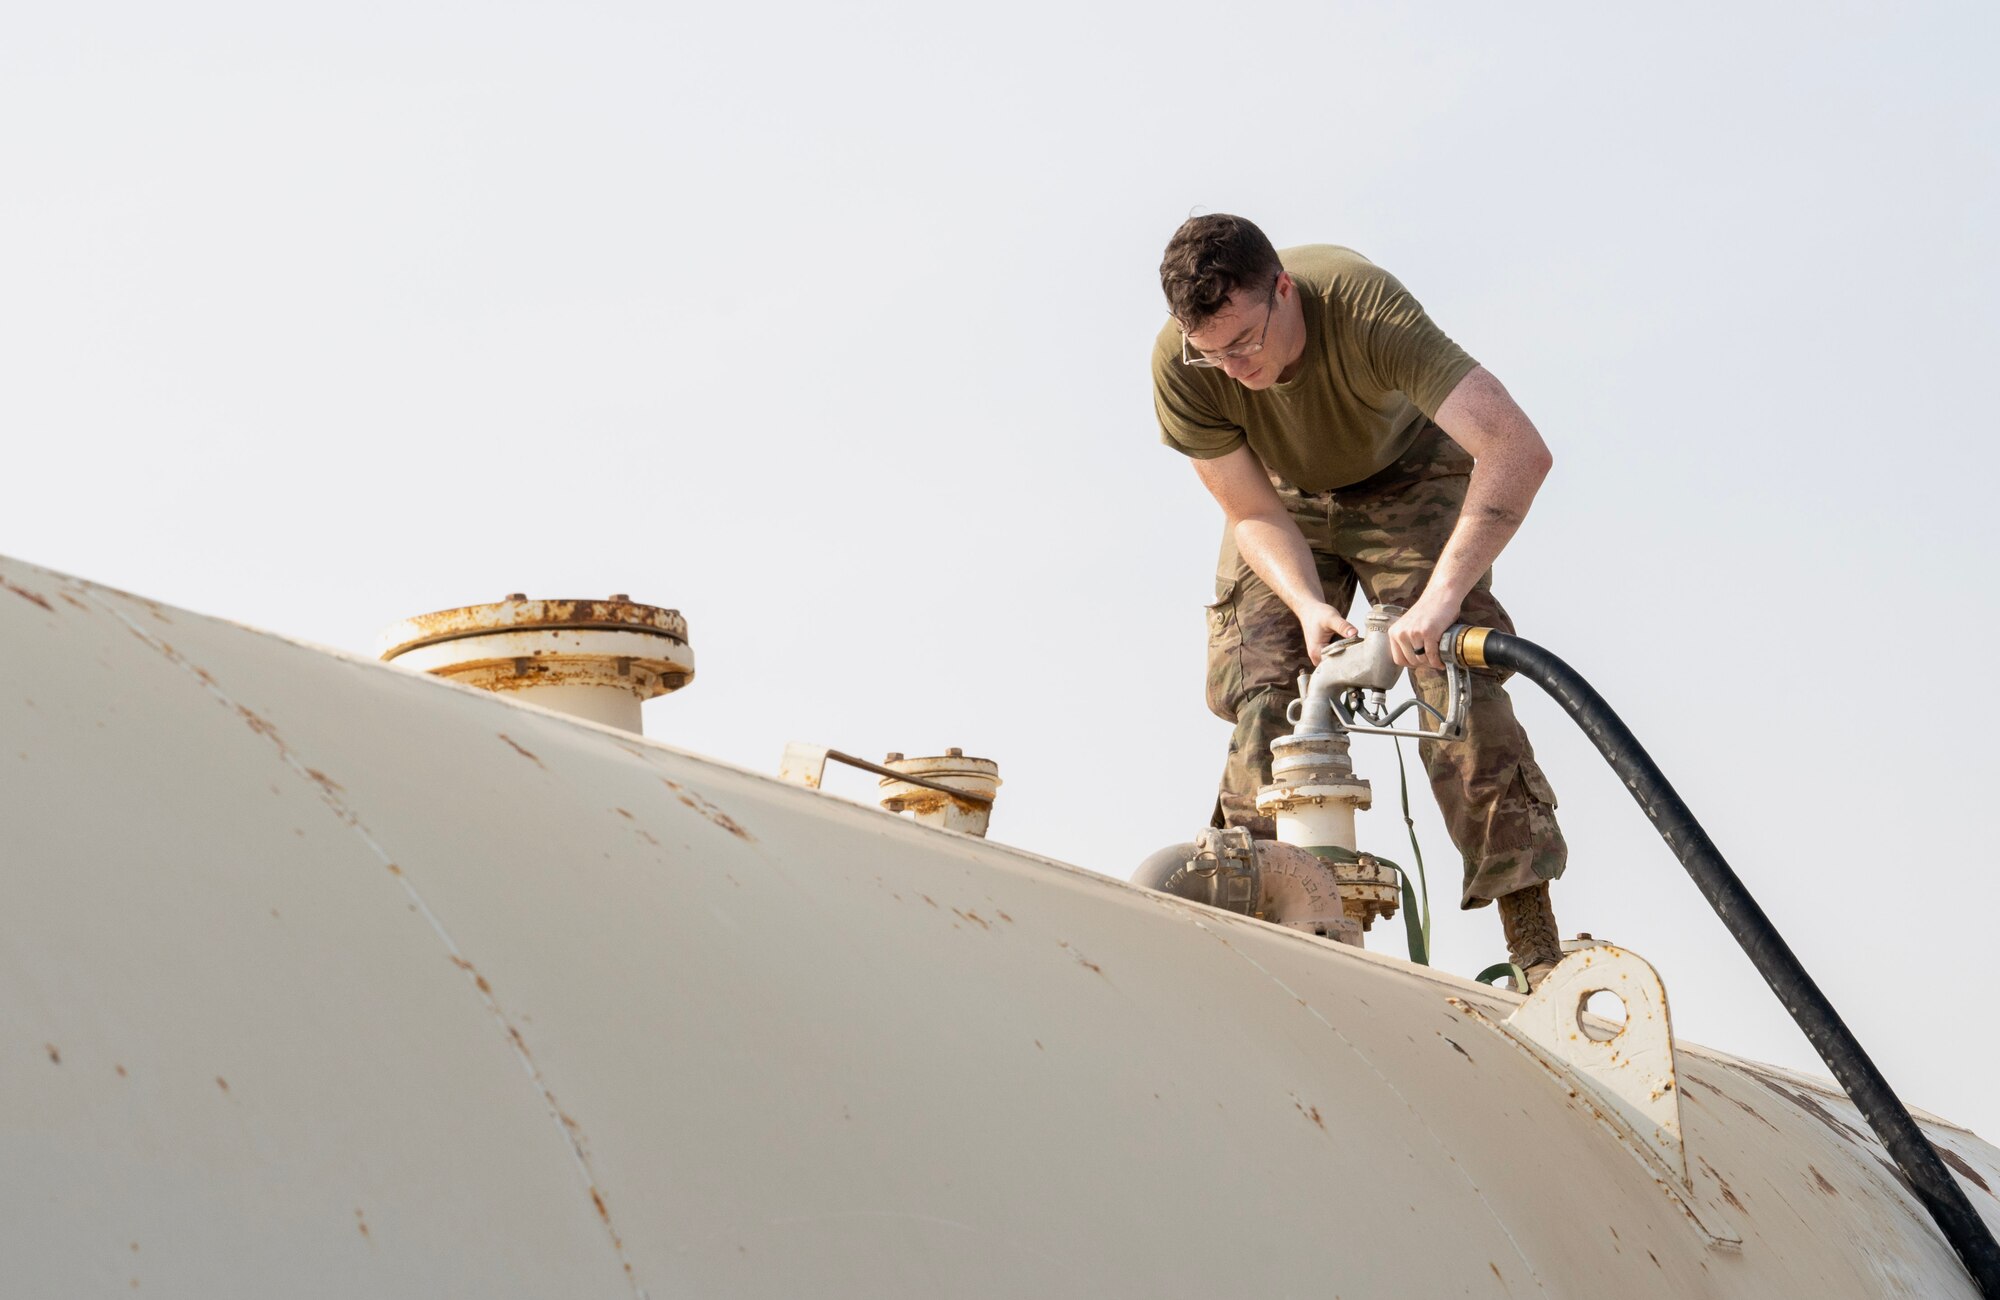 A photo of an Airman standing on top of a fuel tank, filling it with a hose.